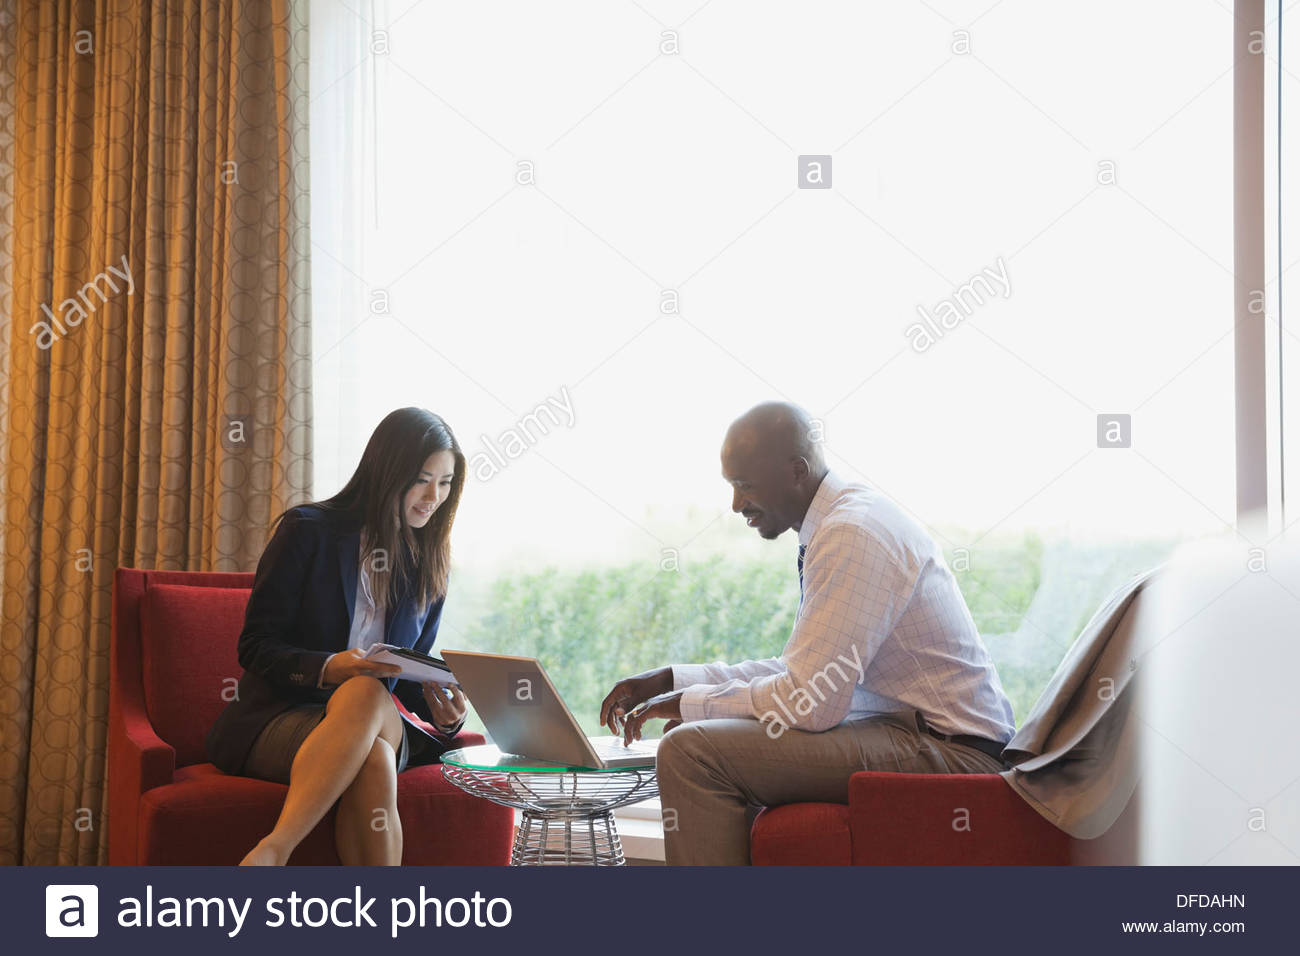 Business people working on laptop in hotel lobby Stock Photo